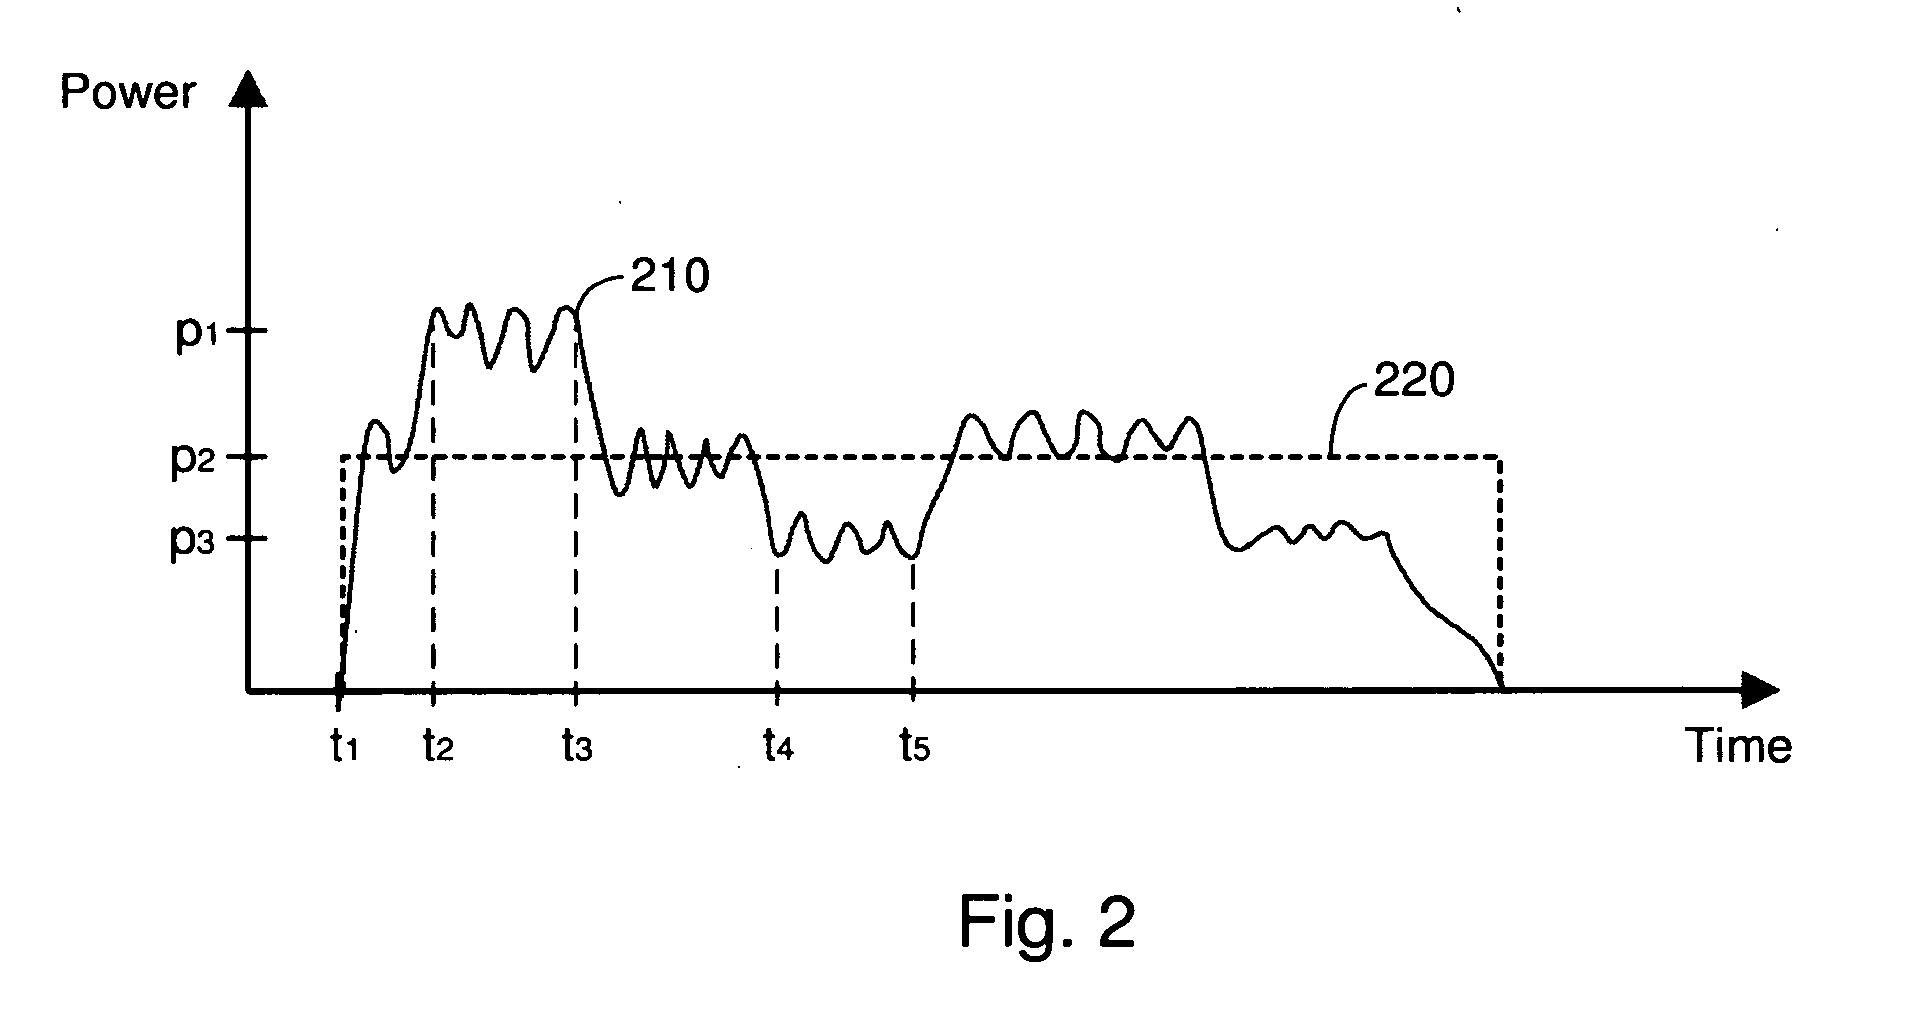 Systems and methods for determining and using power profiles for software programs executing on data processors